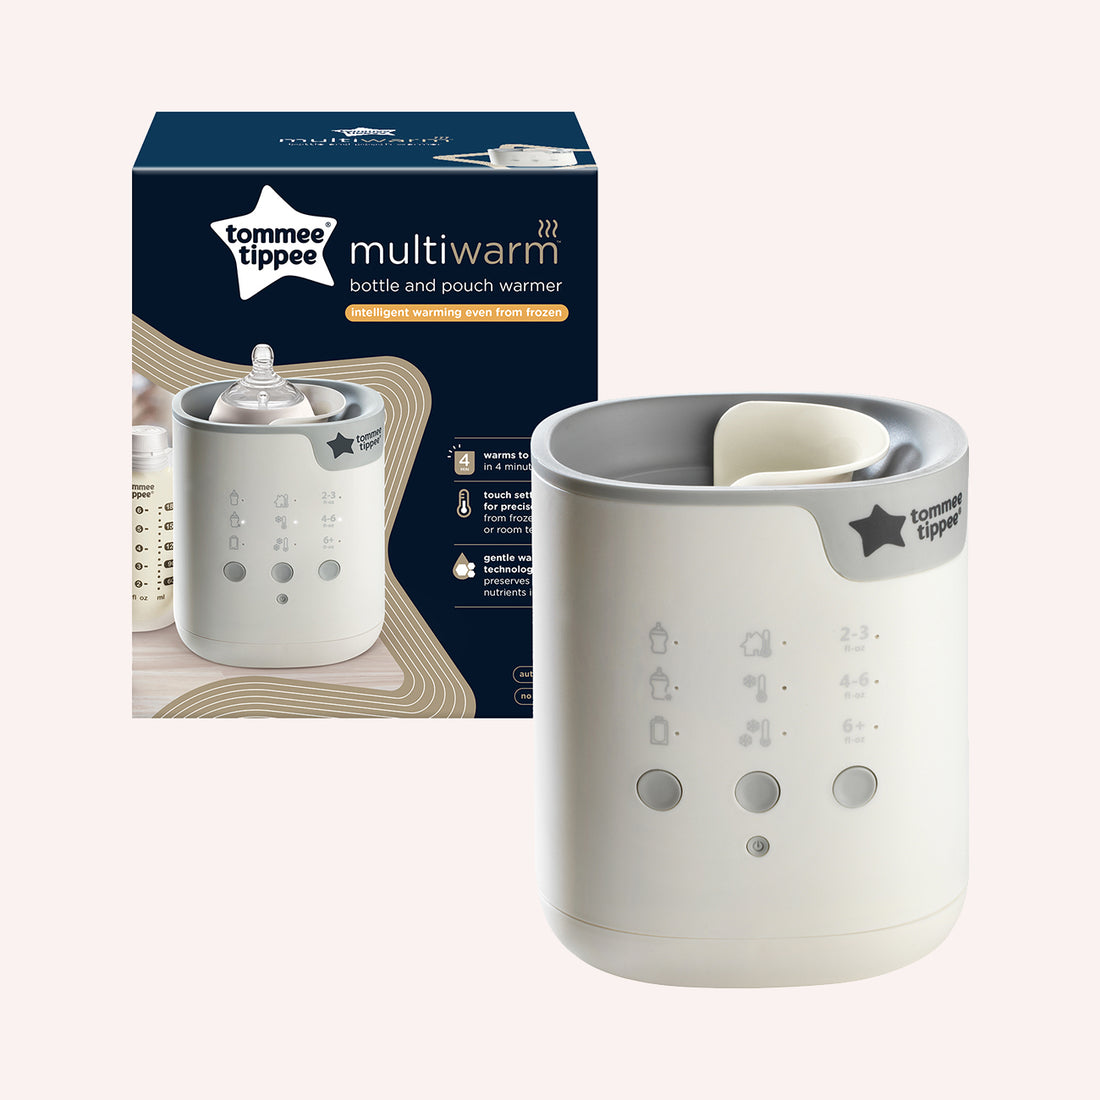 Multiwarm Bottle and Pouch Warmer